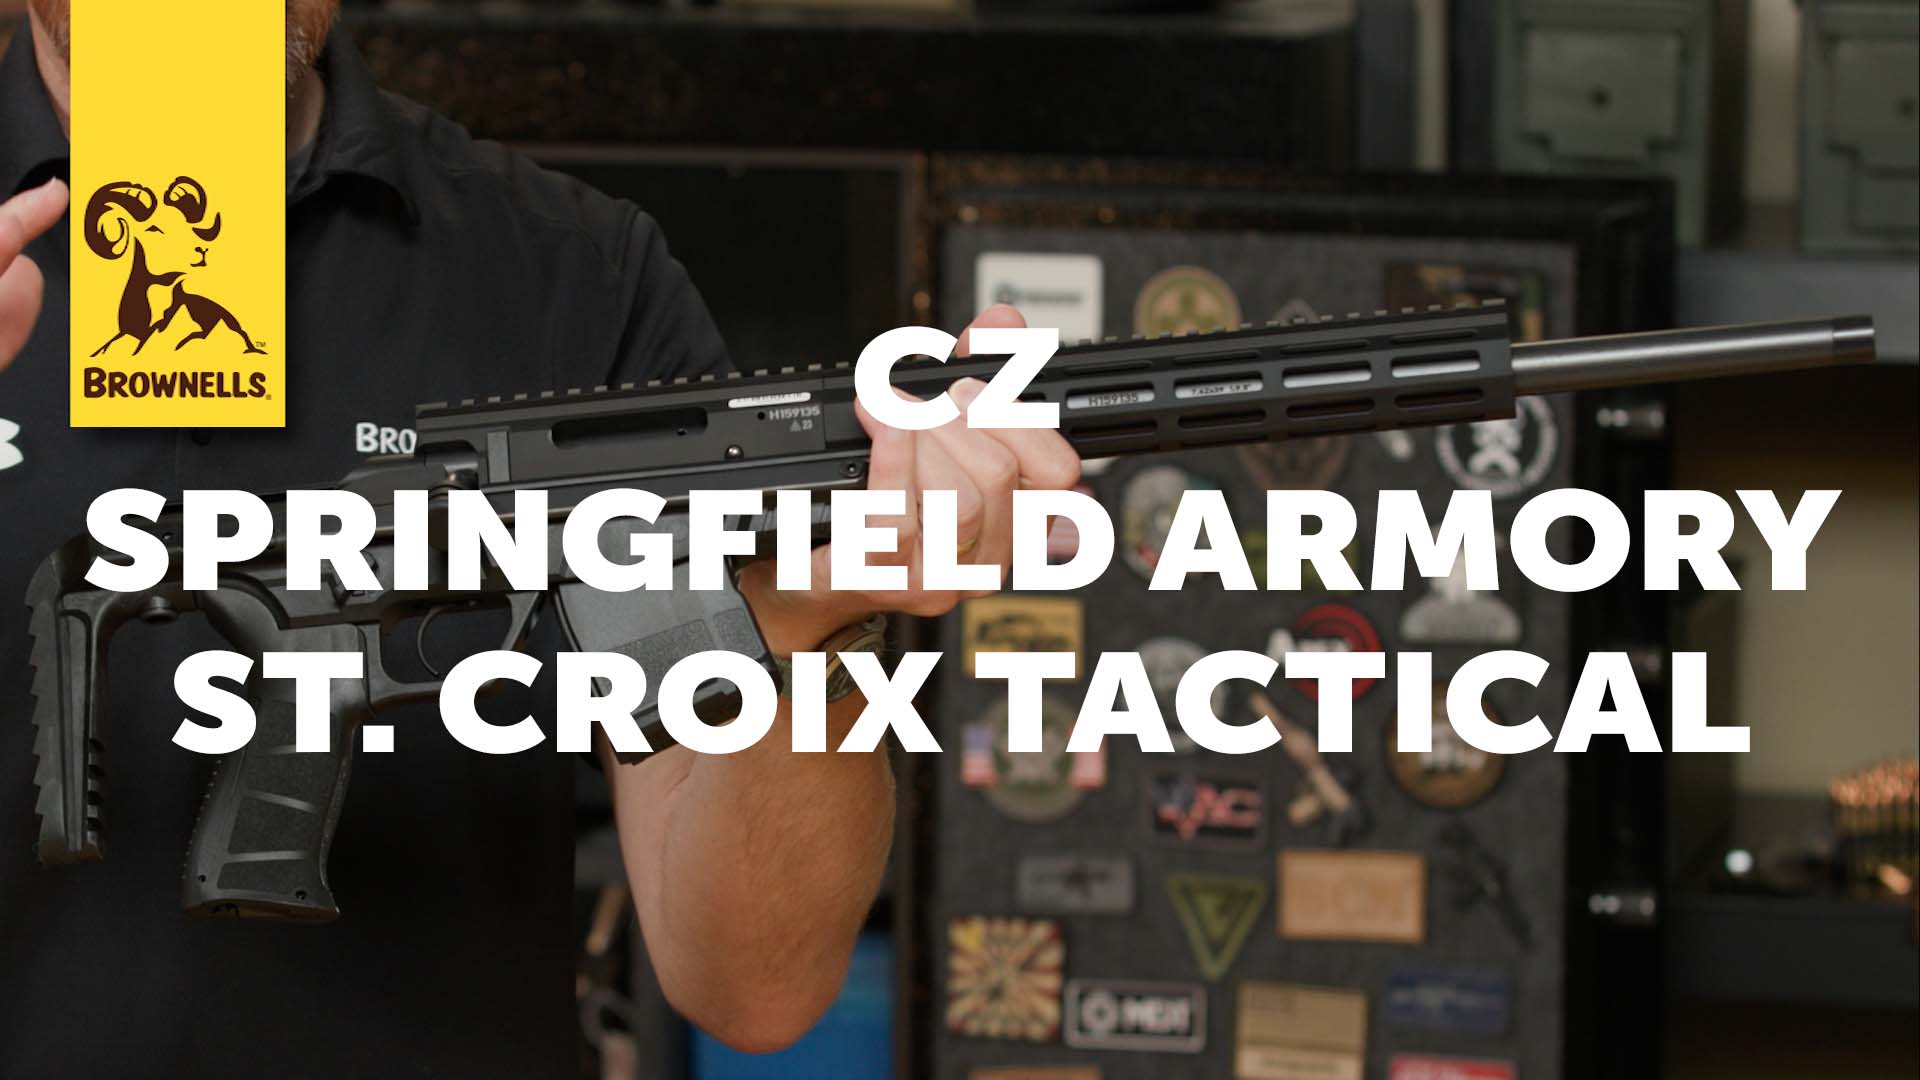 New Products: CZ, Springfield Armory & St. Croix Tactical